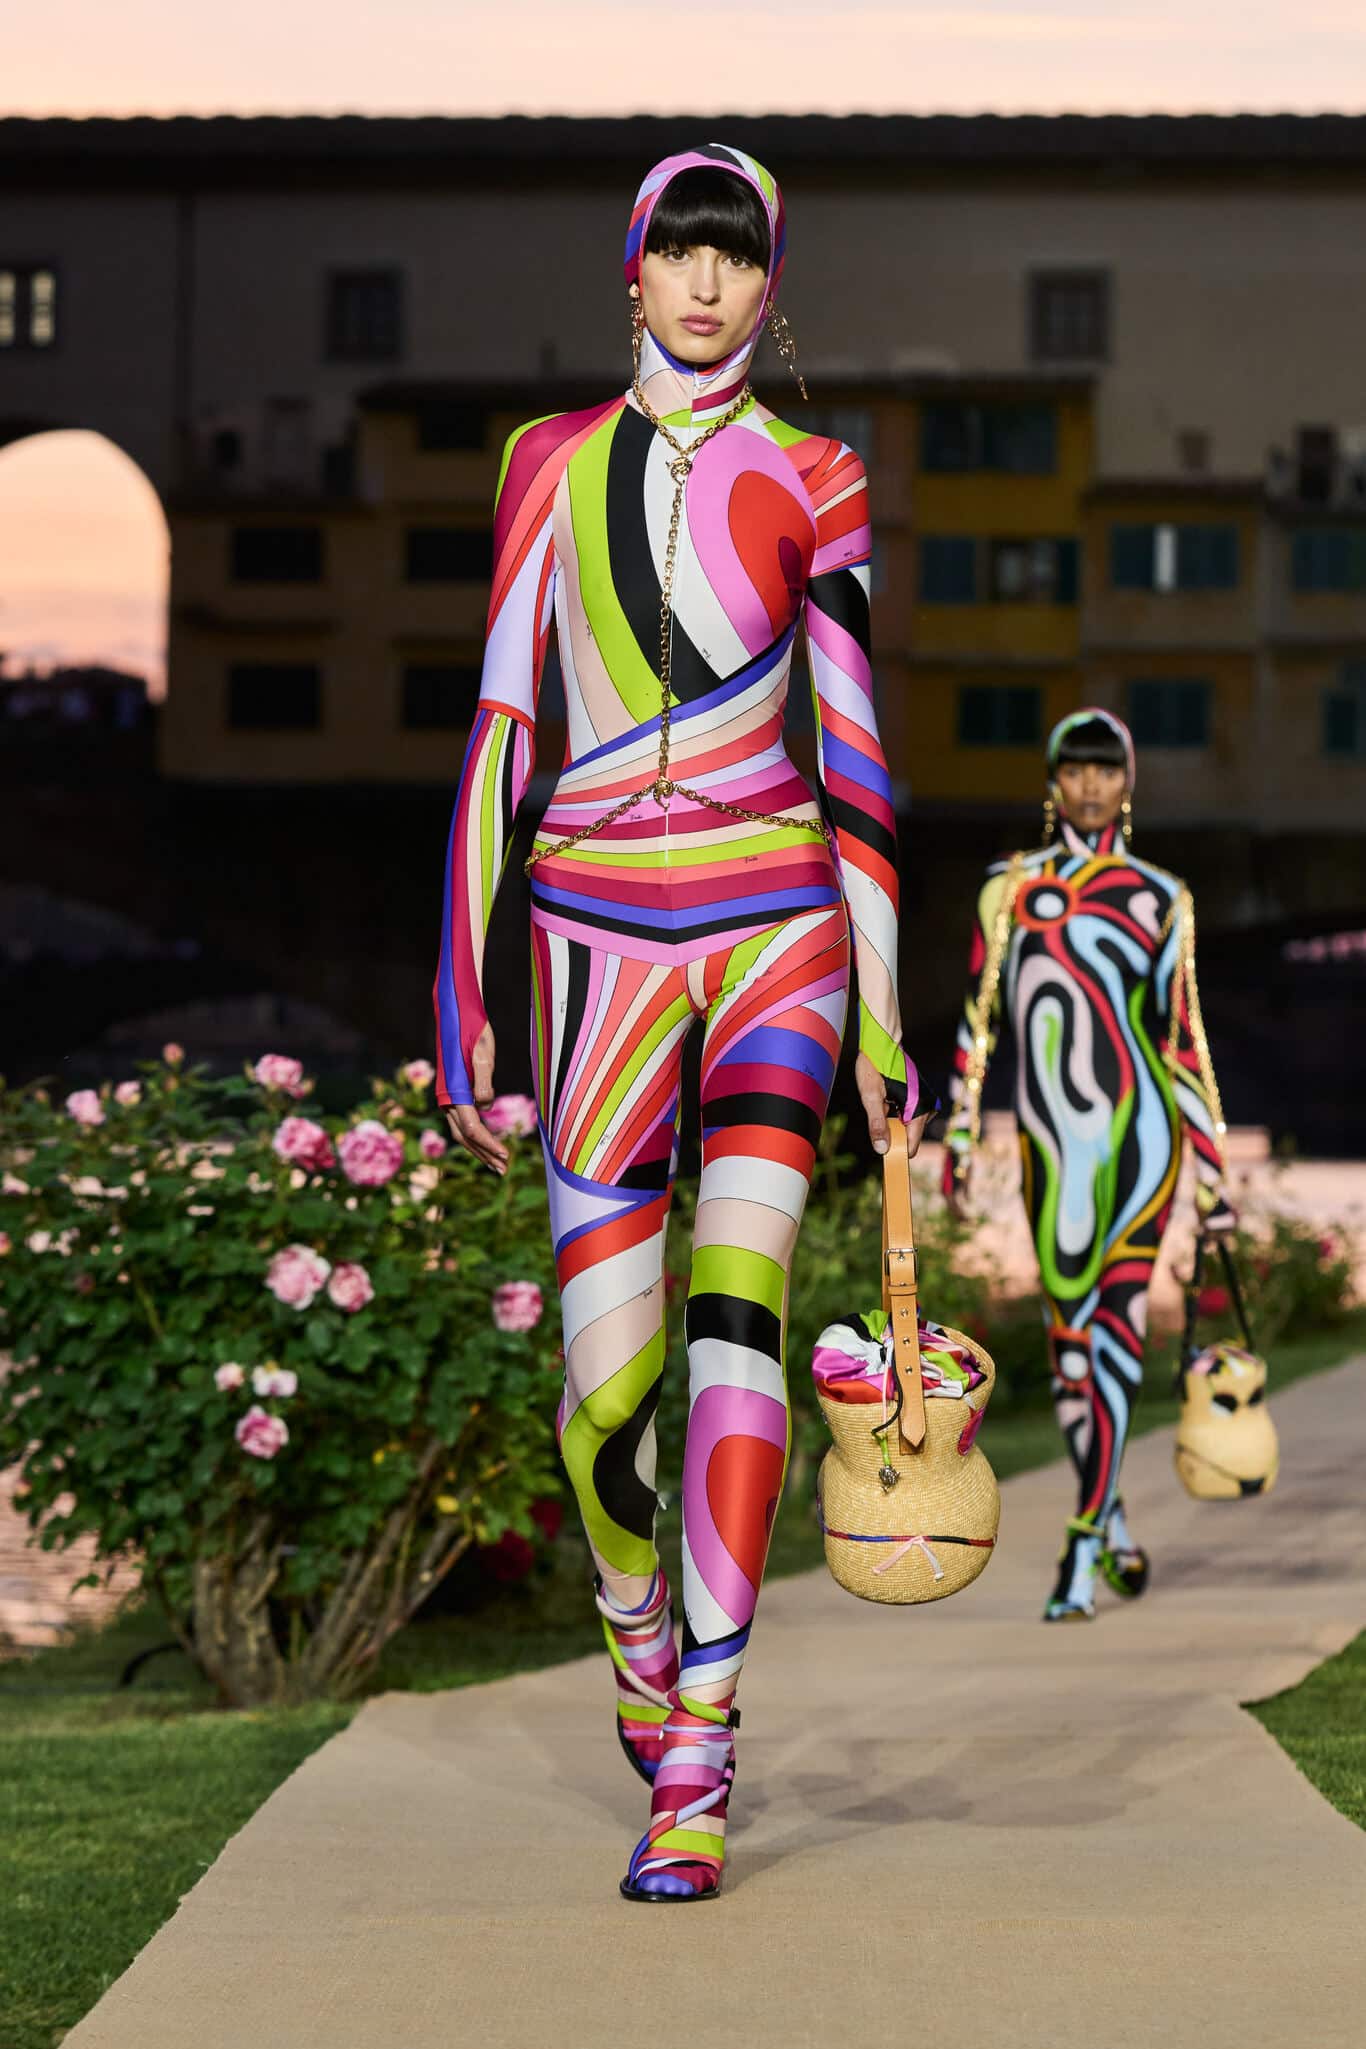 Camille Miceli presents her first fashion show for Emilio Pucci - HIGHXTAR.